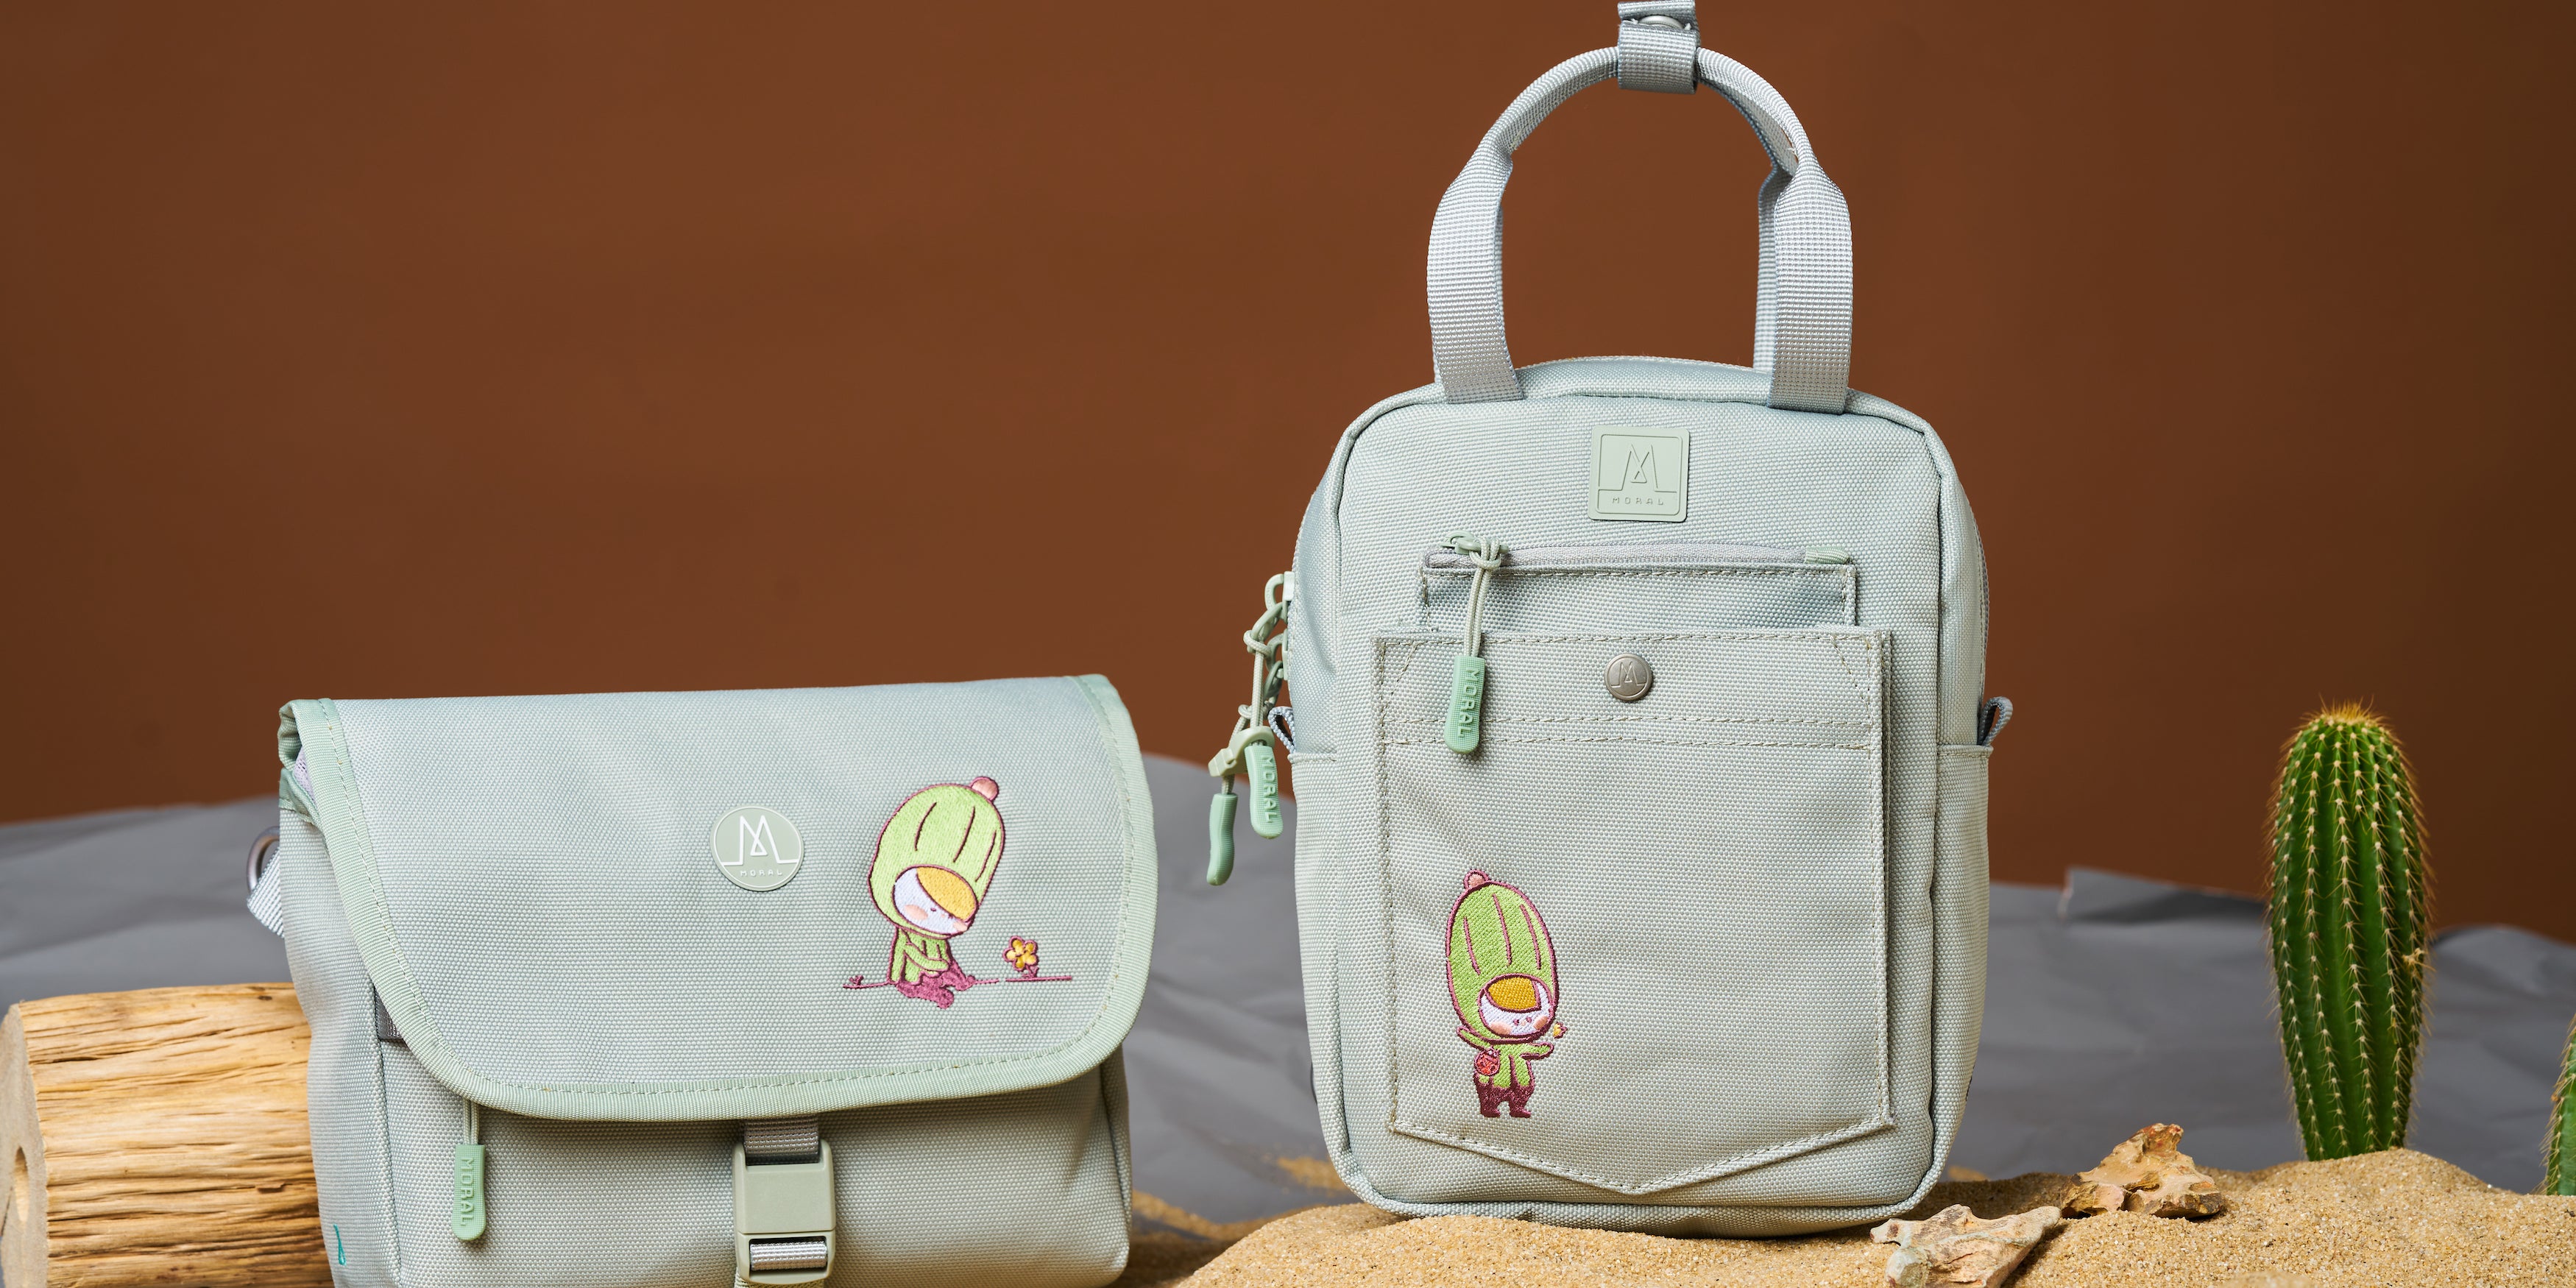 【Local Art Creation】The Little Greens Cactti x Moral Bags Collaborative Project